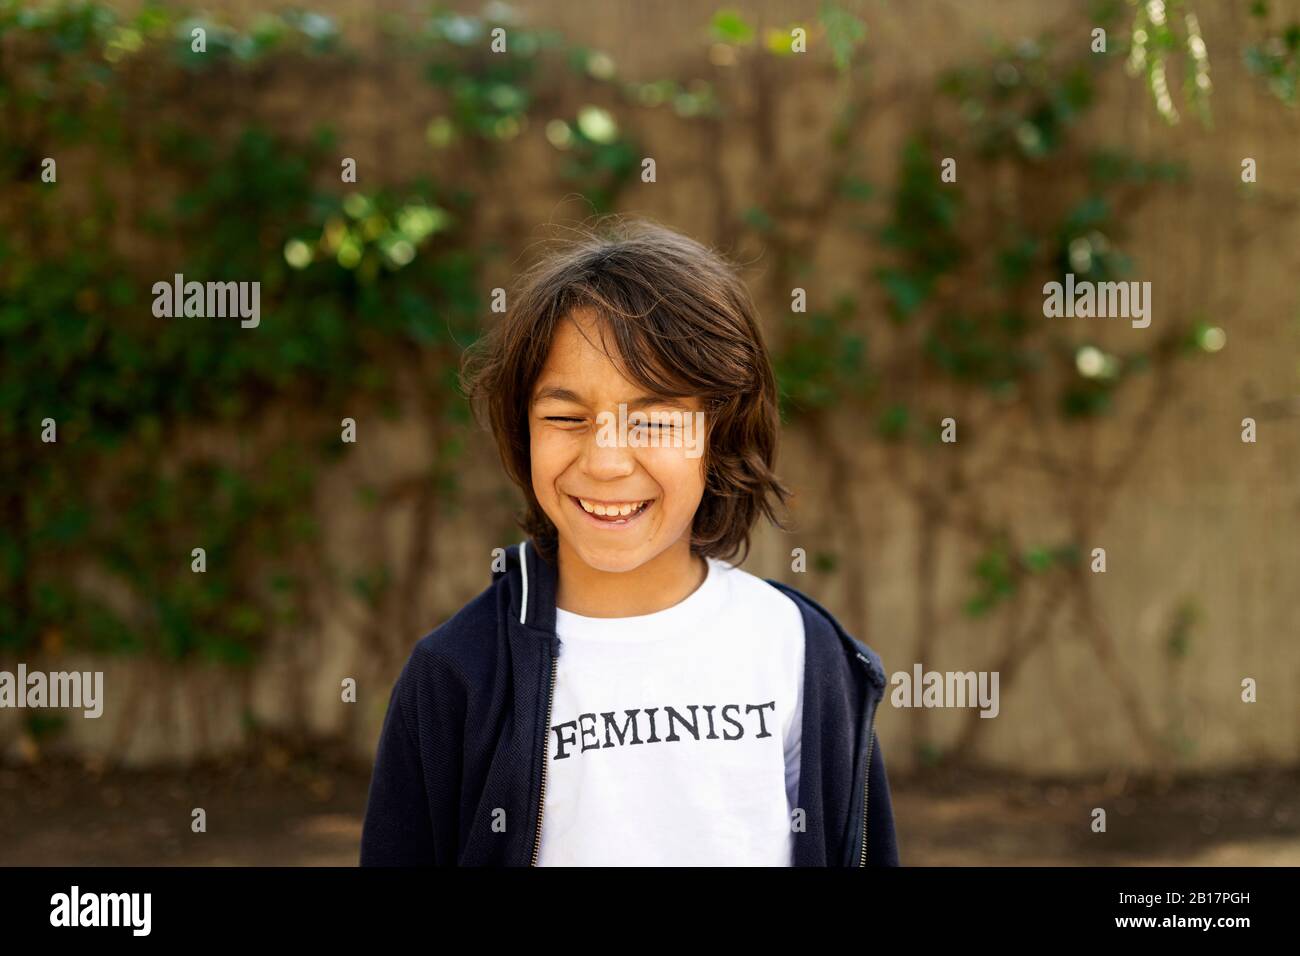 Laughing boy standing in the street with print on t-shirt, saying Feminist Stock Photo